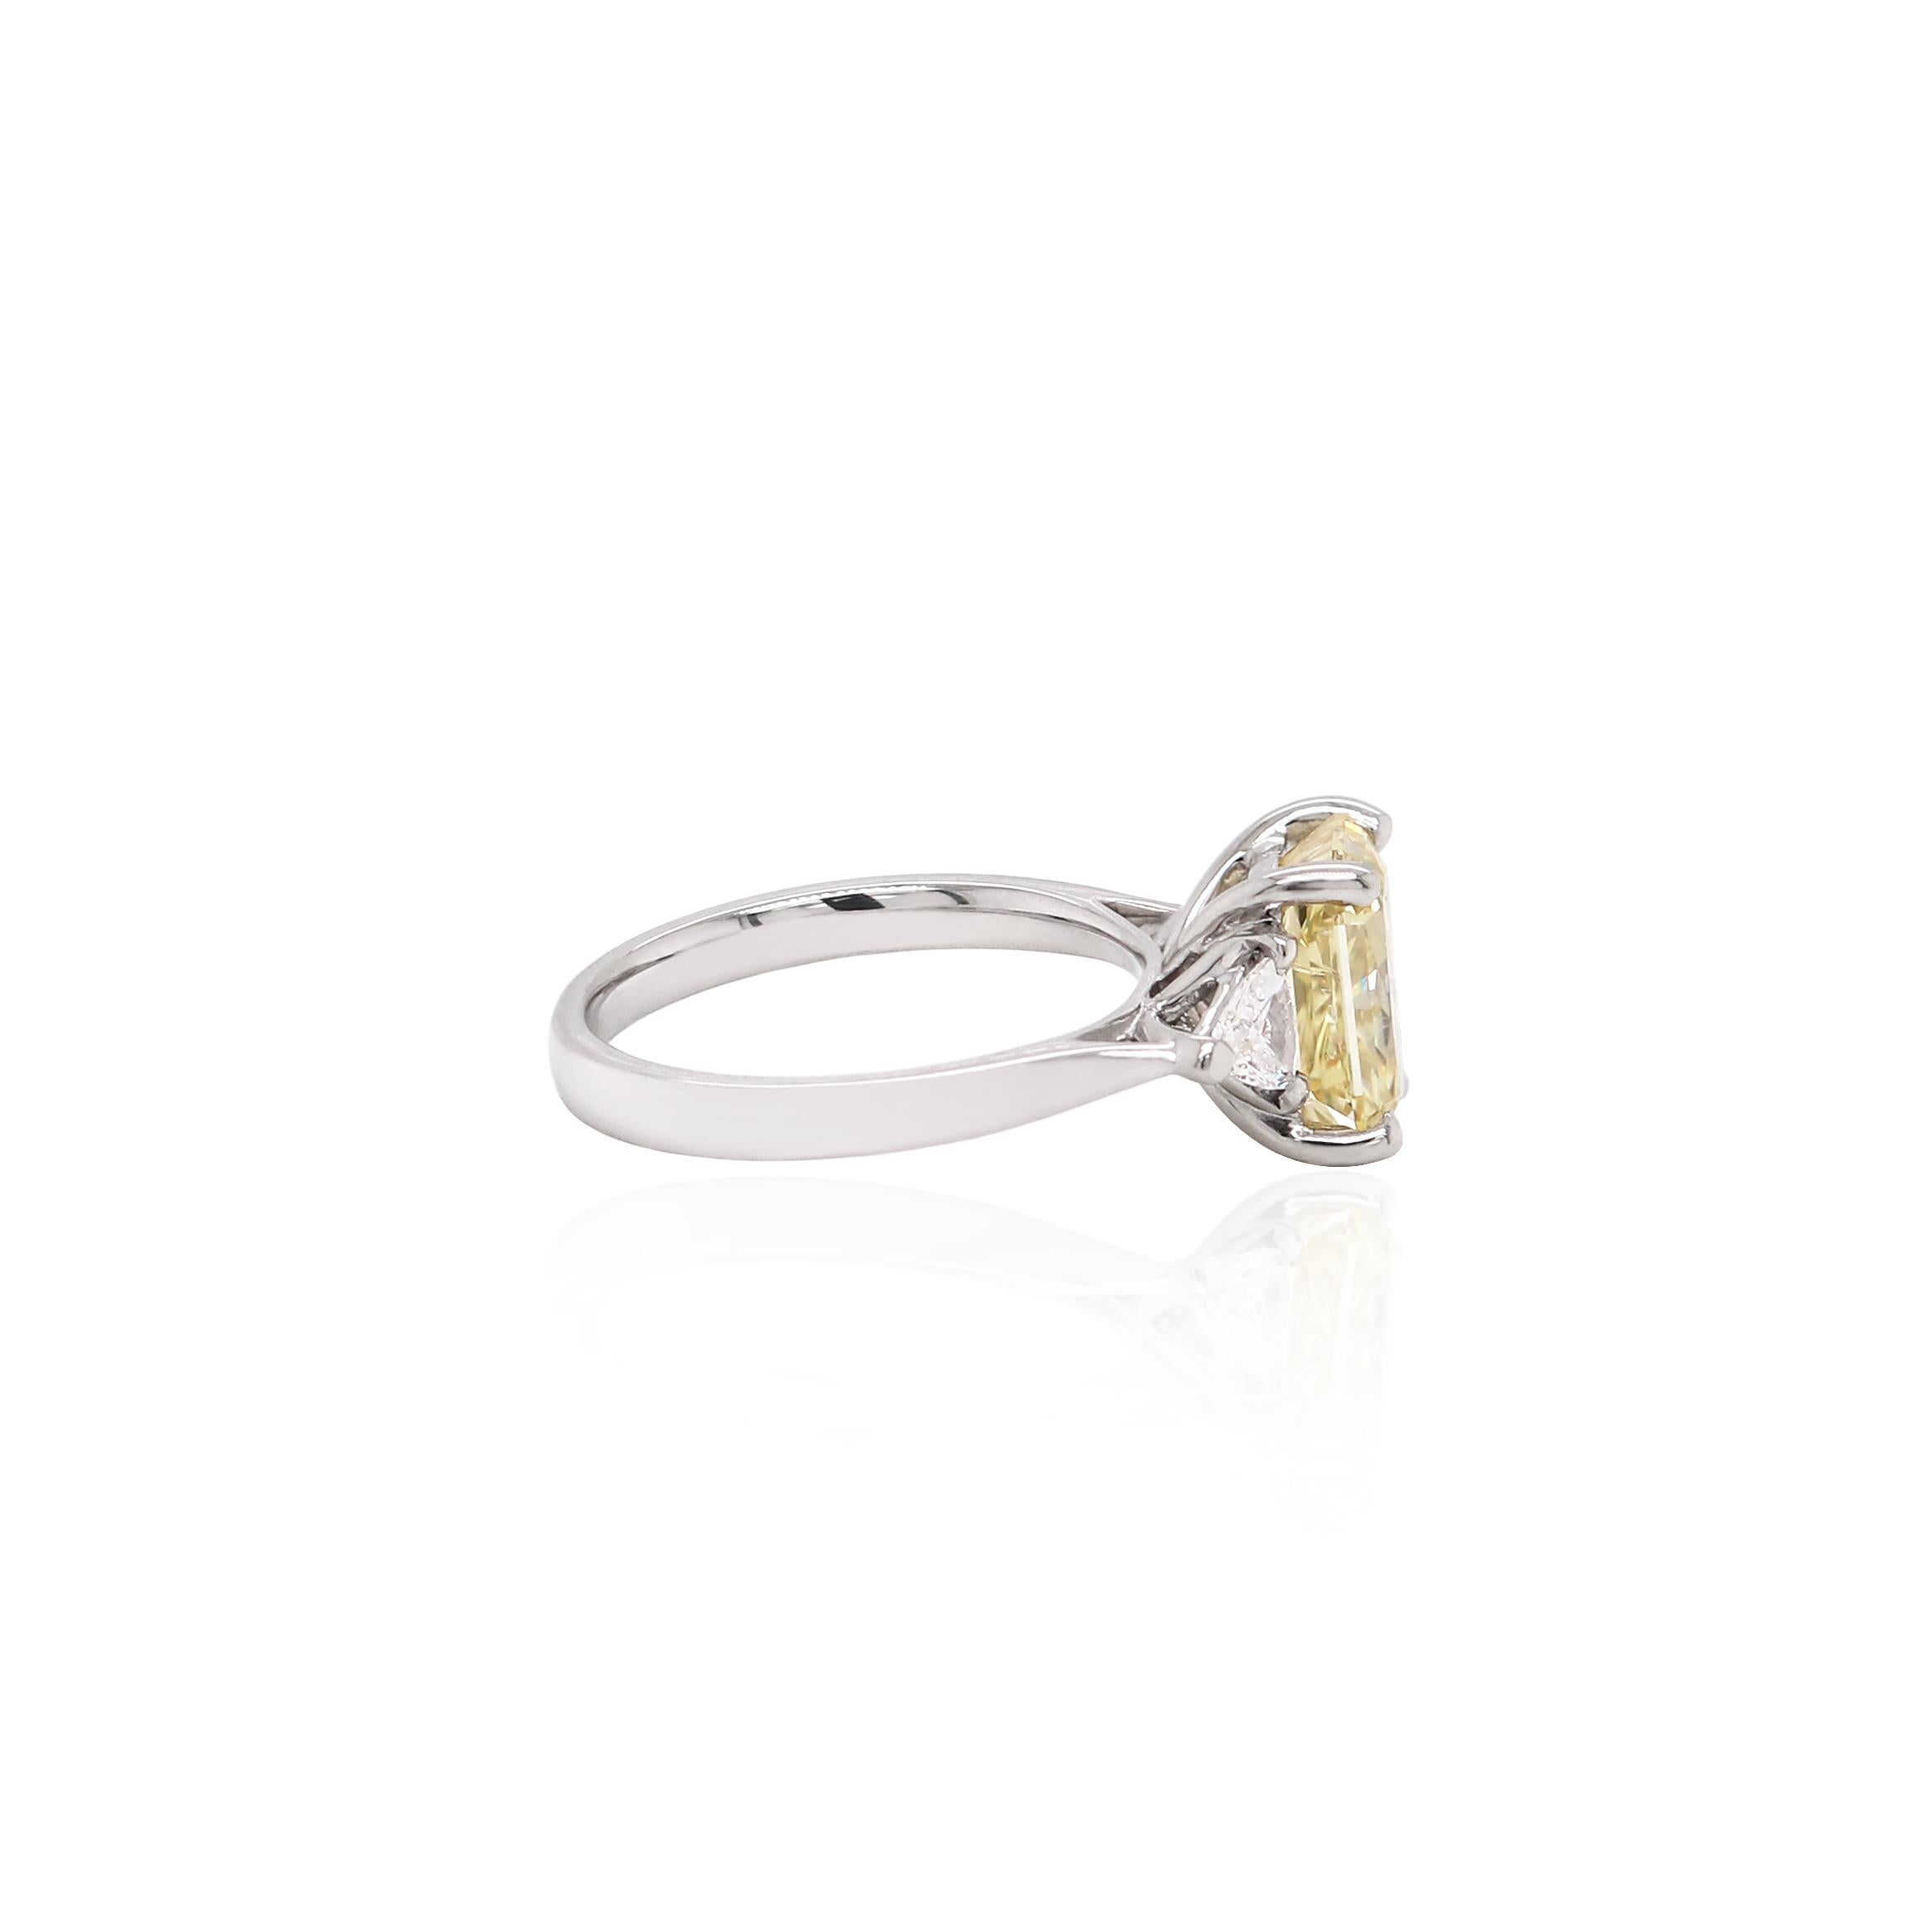 This exquisite engagement ring features a certified fancy intense brownish yellow radiant cut diamond in a four claw, open back setting. This beautiful diamond is accompanied by a trillion cut diamond on either side weighing a total of 0.35ct in